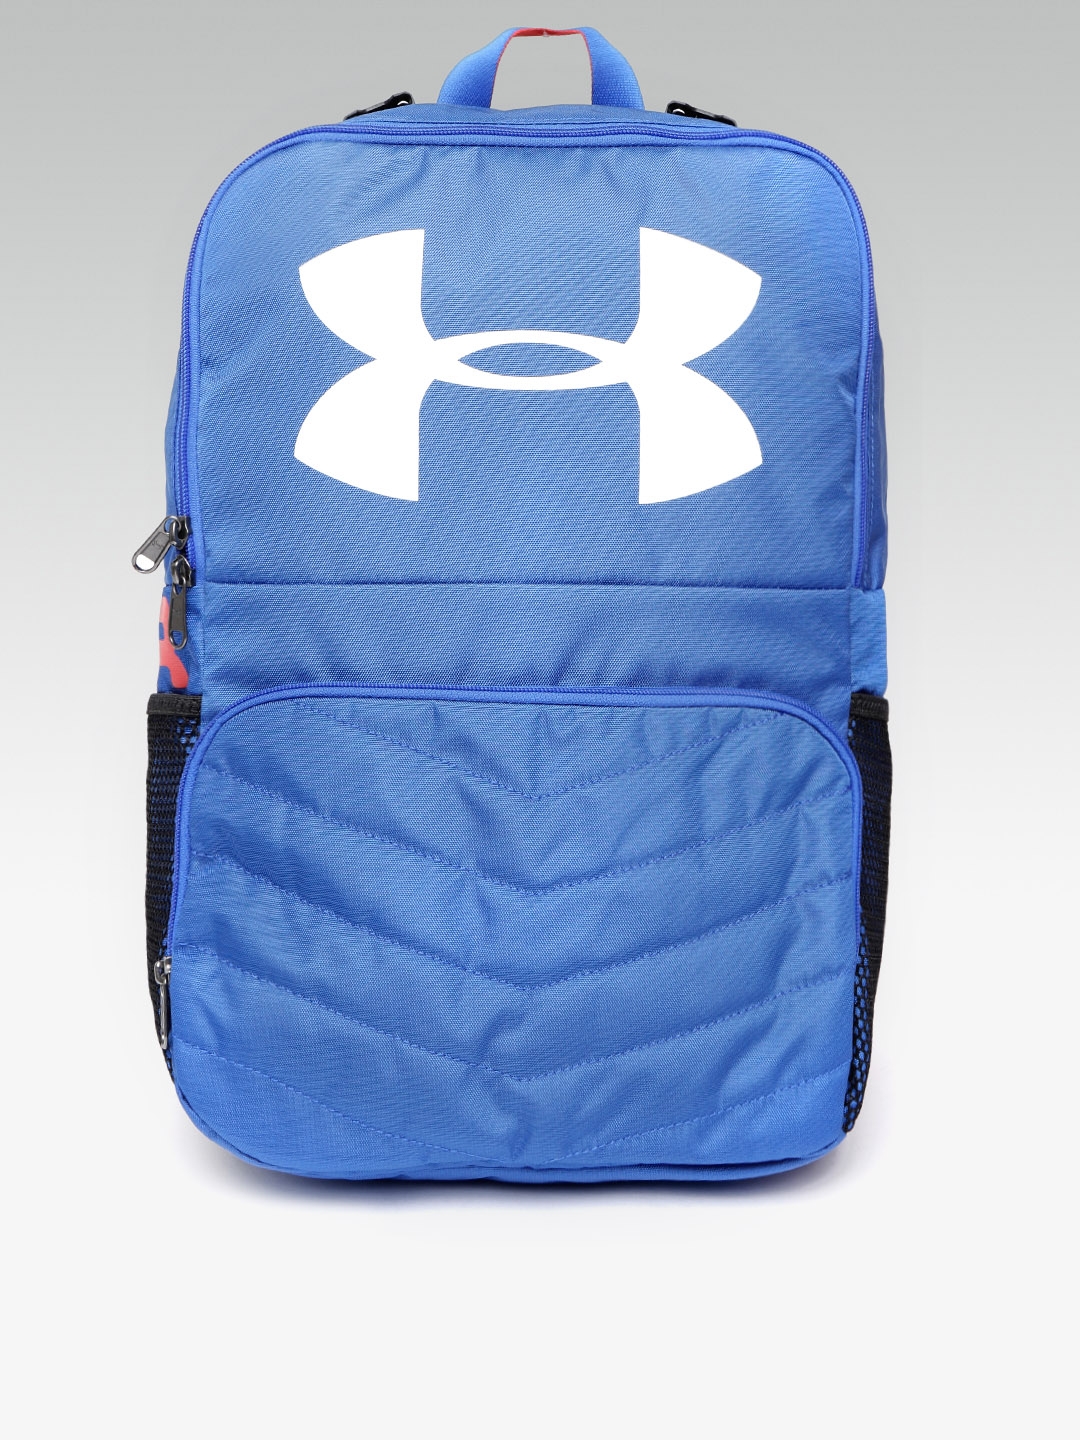 under armour change up backpack